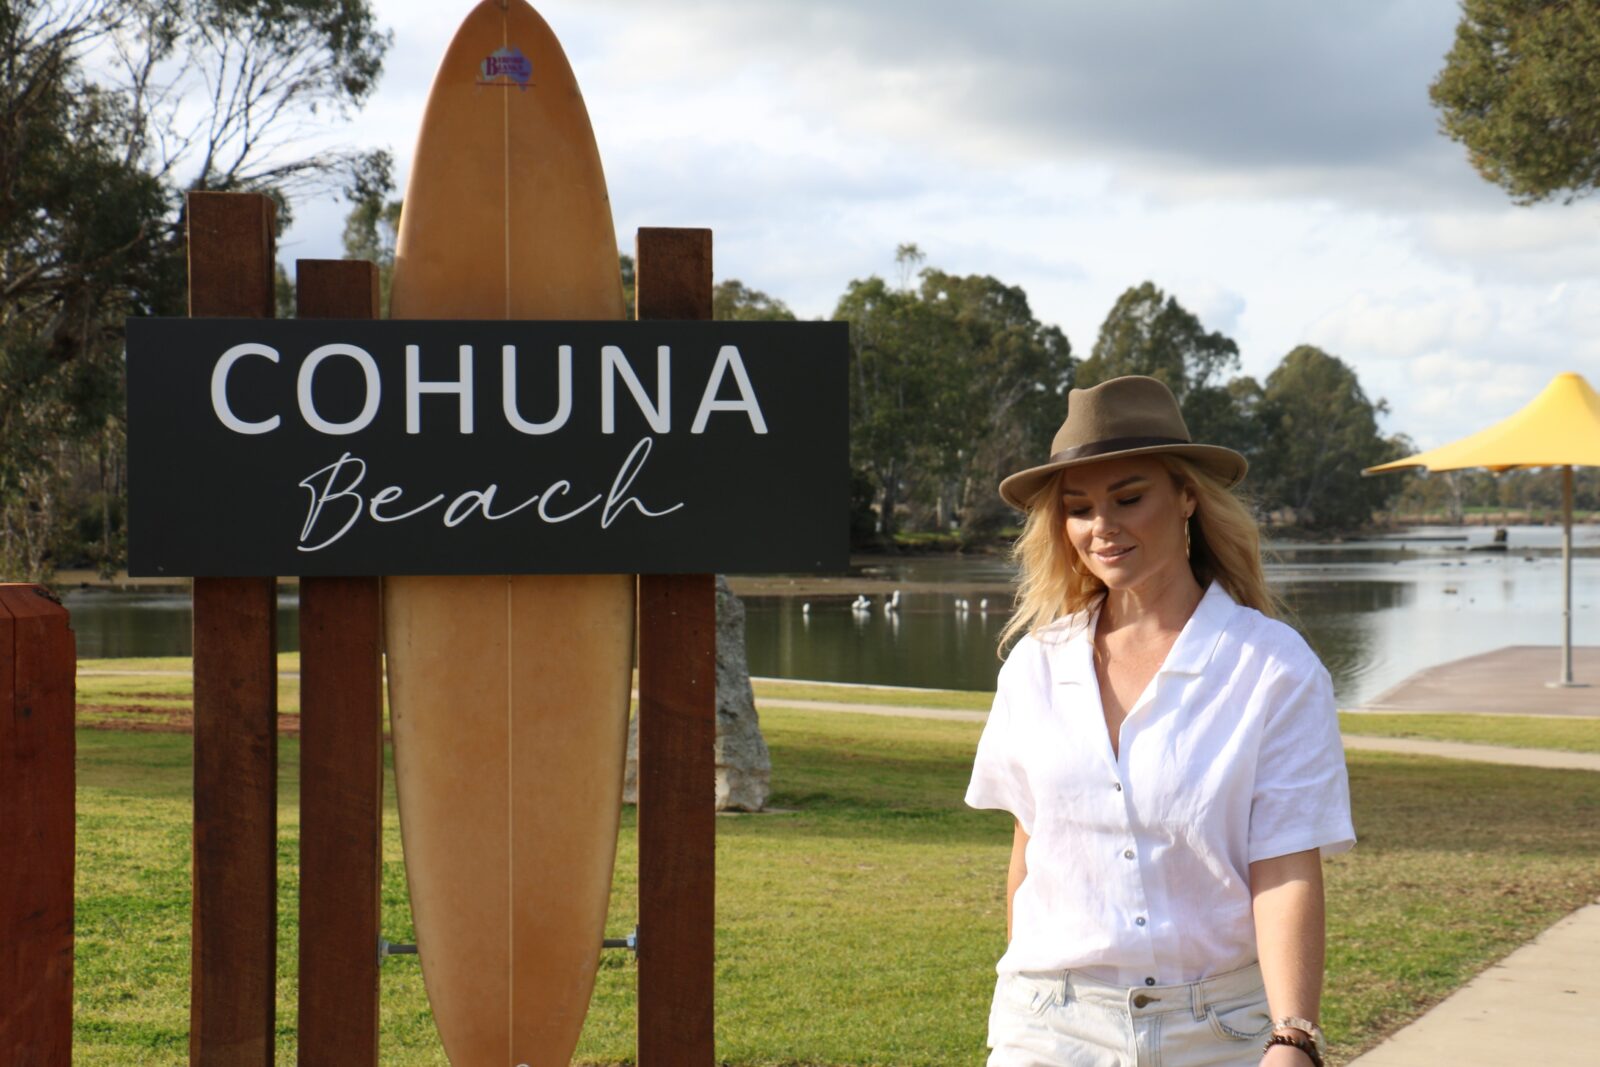 Woman in brimmed hat walking past Cohuna Beach sign